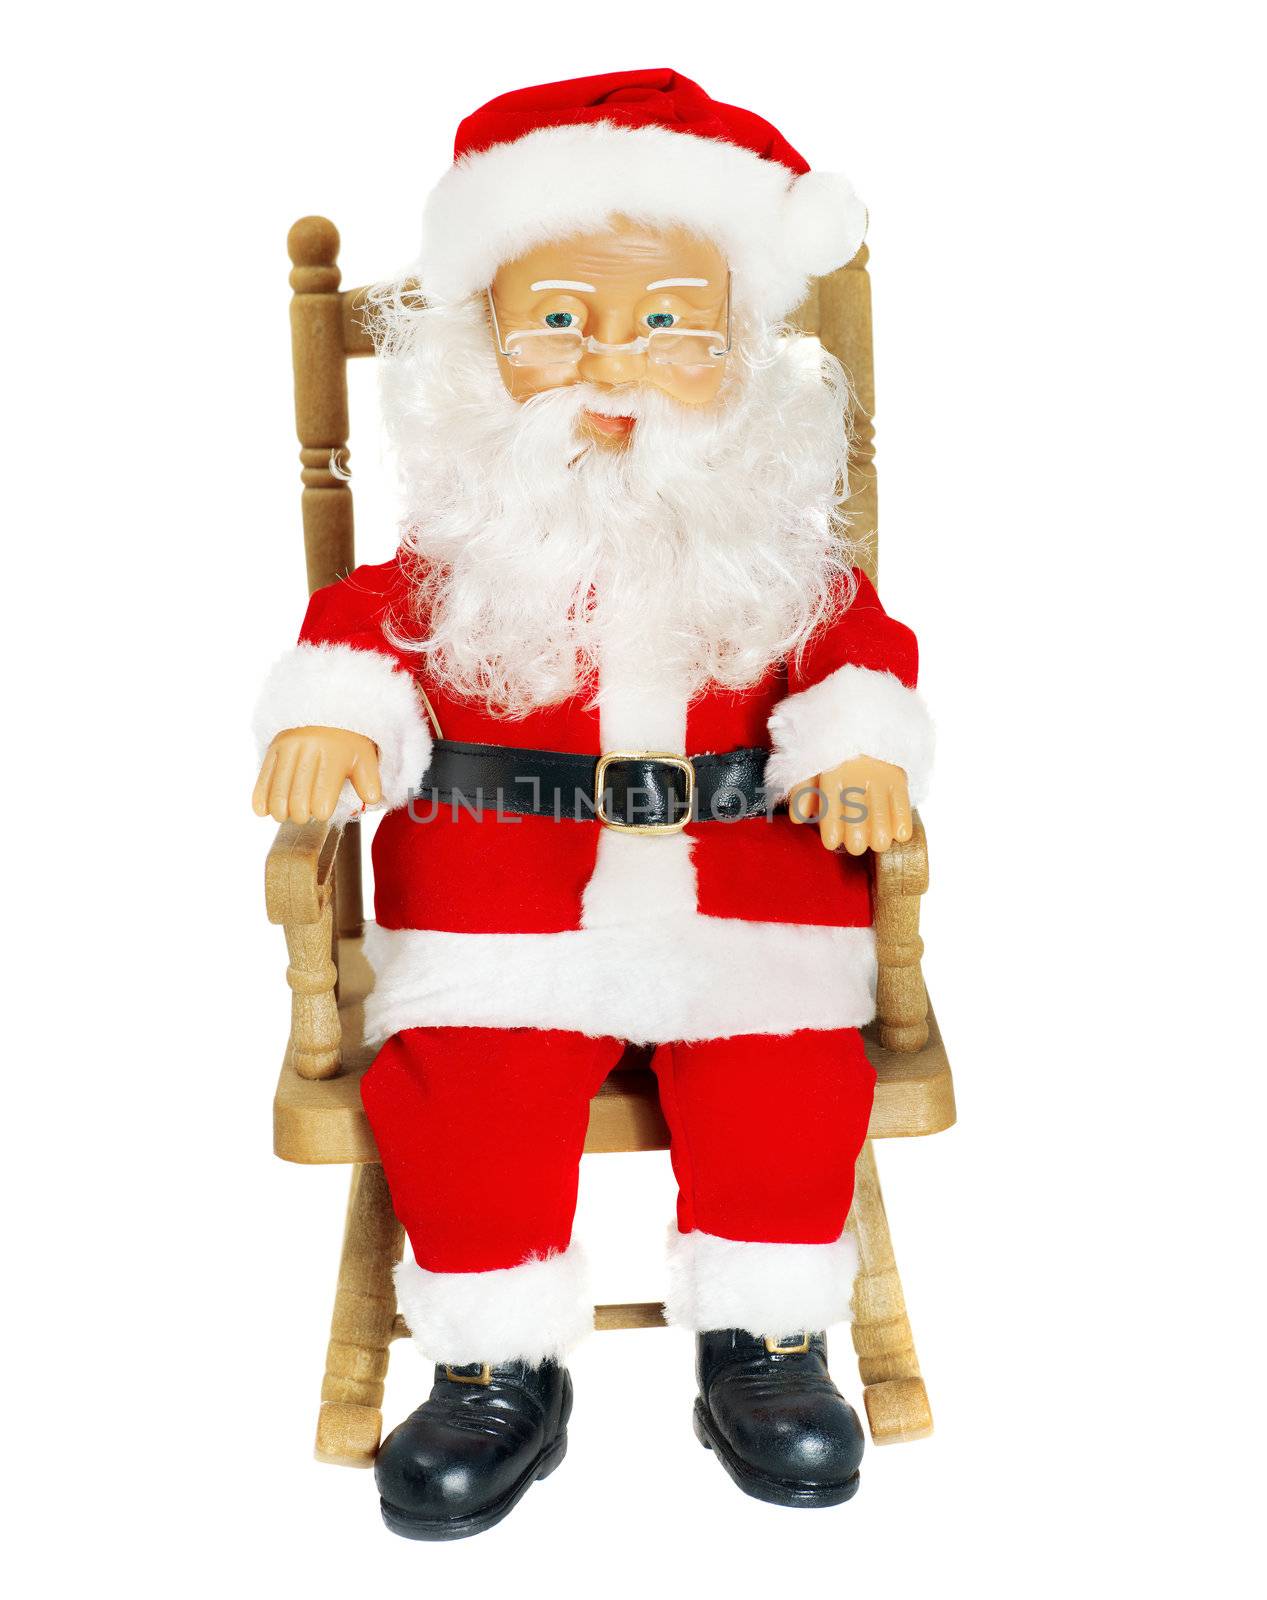 Santa Claus in chair figurine, isolated on white